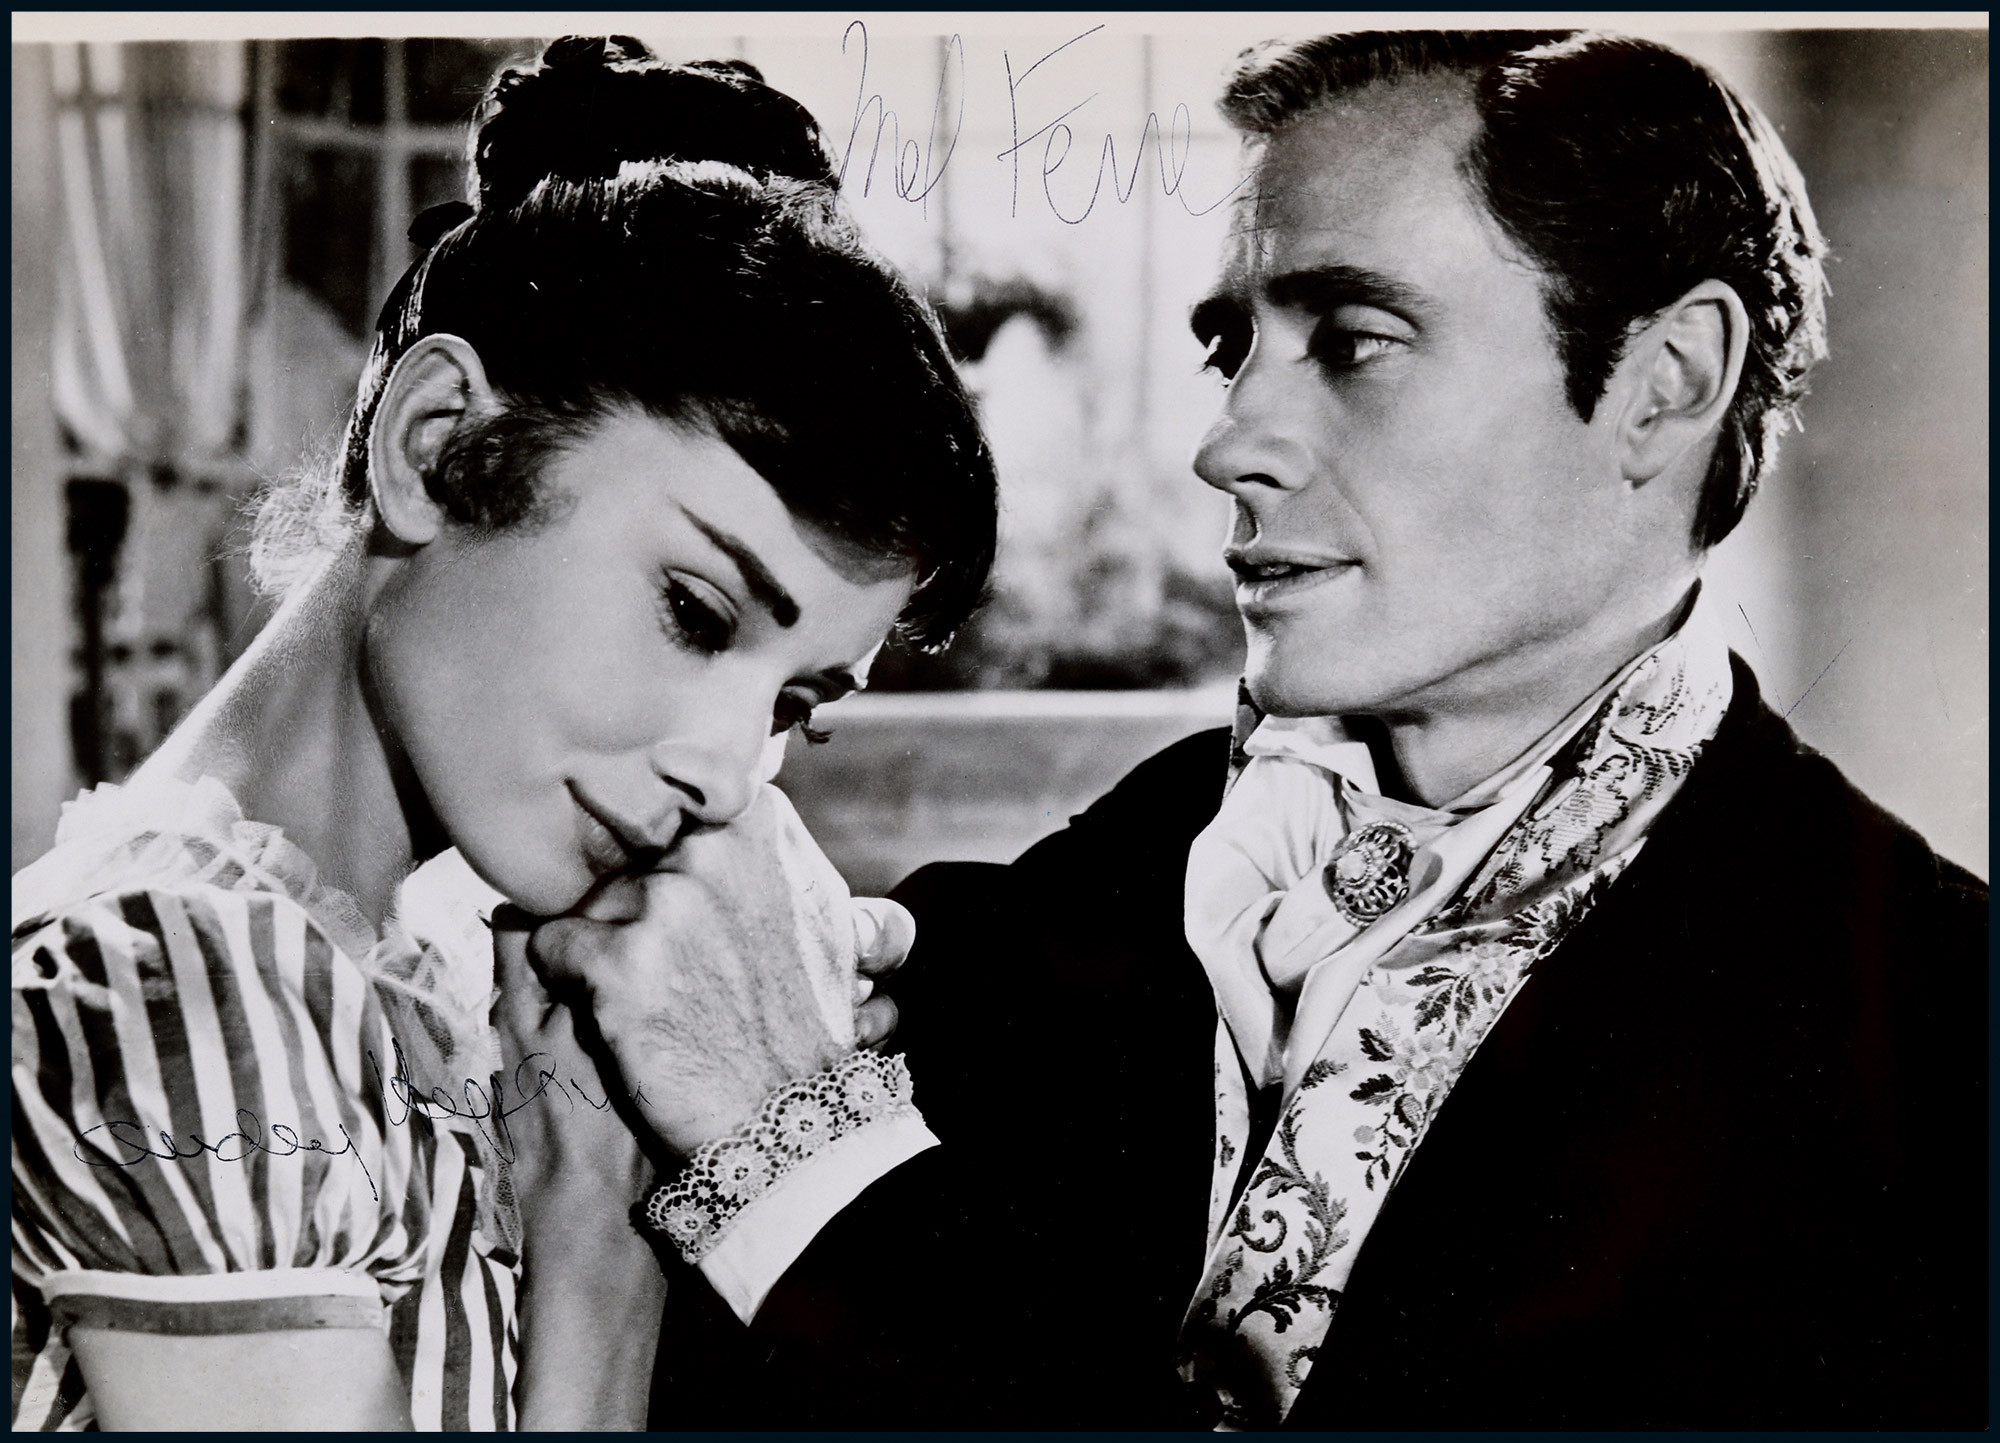 The autographed stage photo of “War and Peace” signed by the couple Audrey Hepburn “Oscar Goddess”and Mel Ferrer, with a certificate